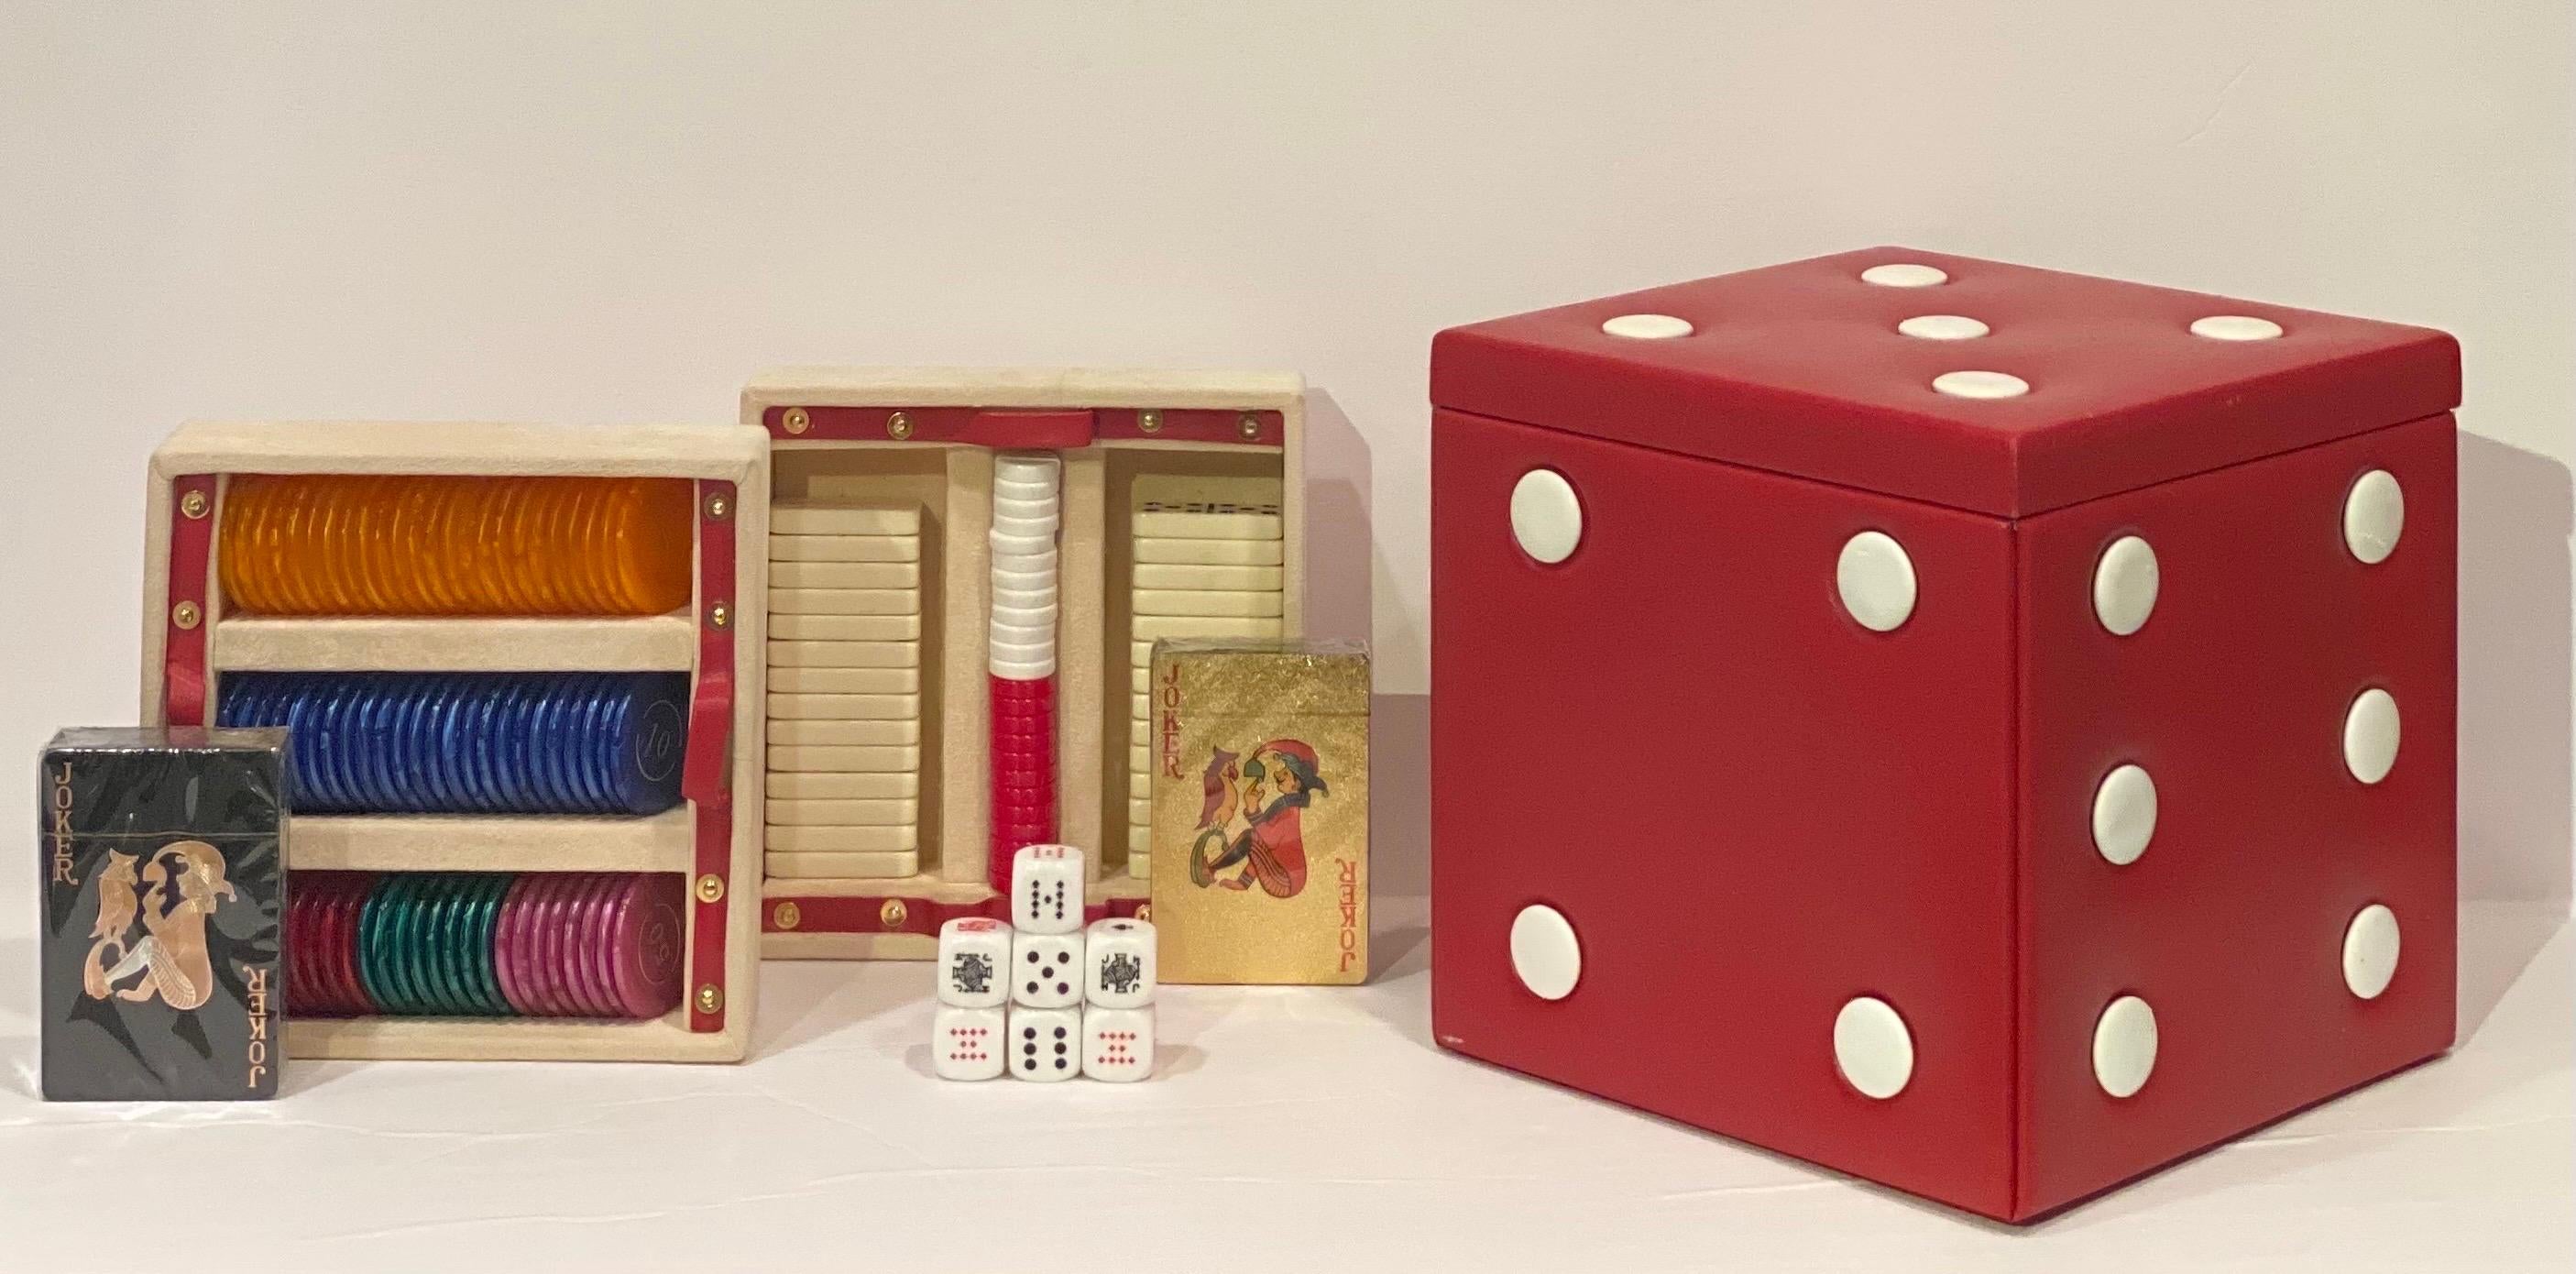 We are very pleased to offer a vintage game box, made in Italy, circa the 1960s. Neatly arranged in a red vegan leather case and a suede interior, this carrying case is both a lovely decor piece and a ready-to-play game anyone can enjoy. With a